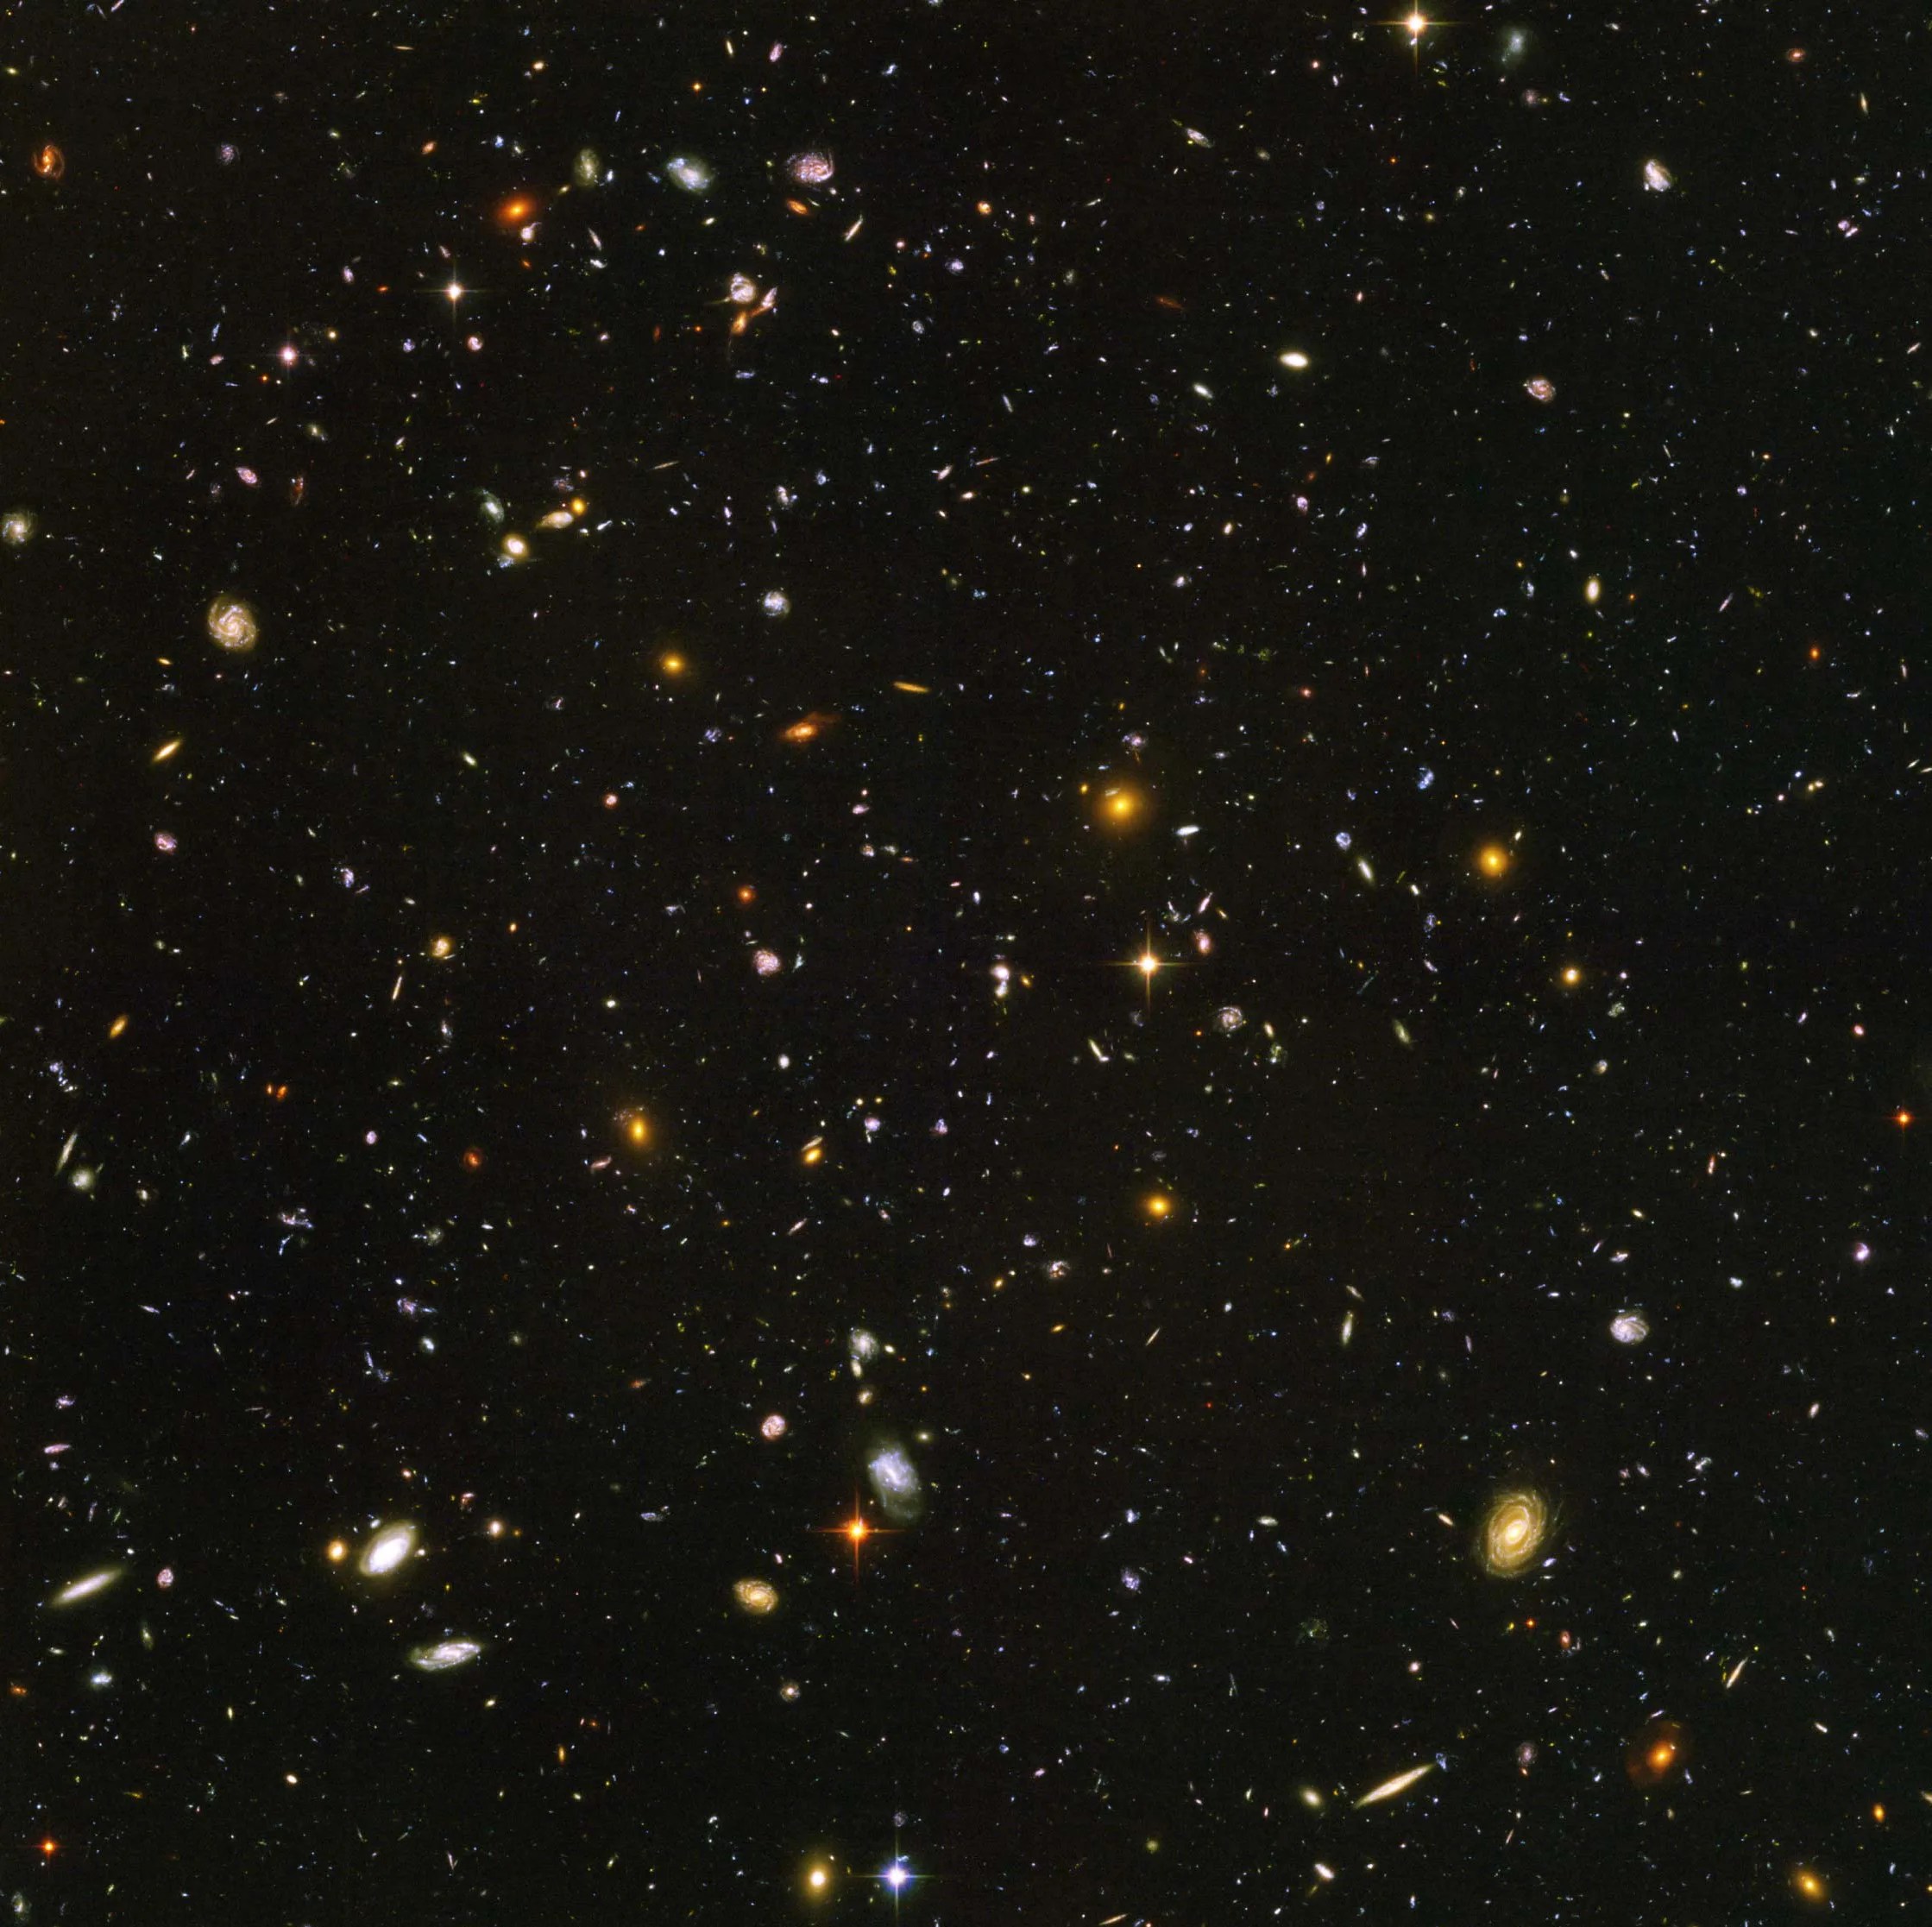 The field of view is filled with galaxies in all shapes, sizes, colors, and galaxy types. All against a black backdrop.